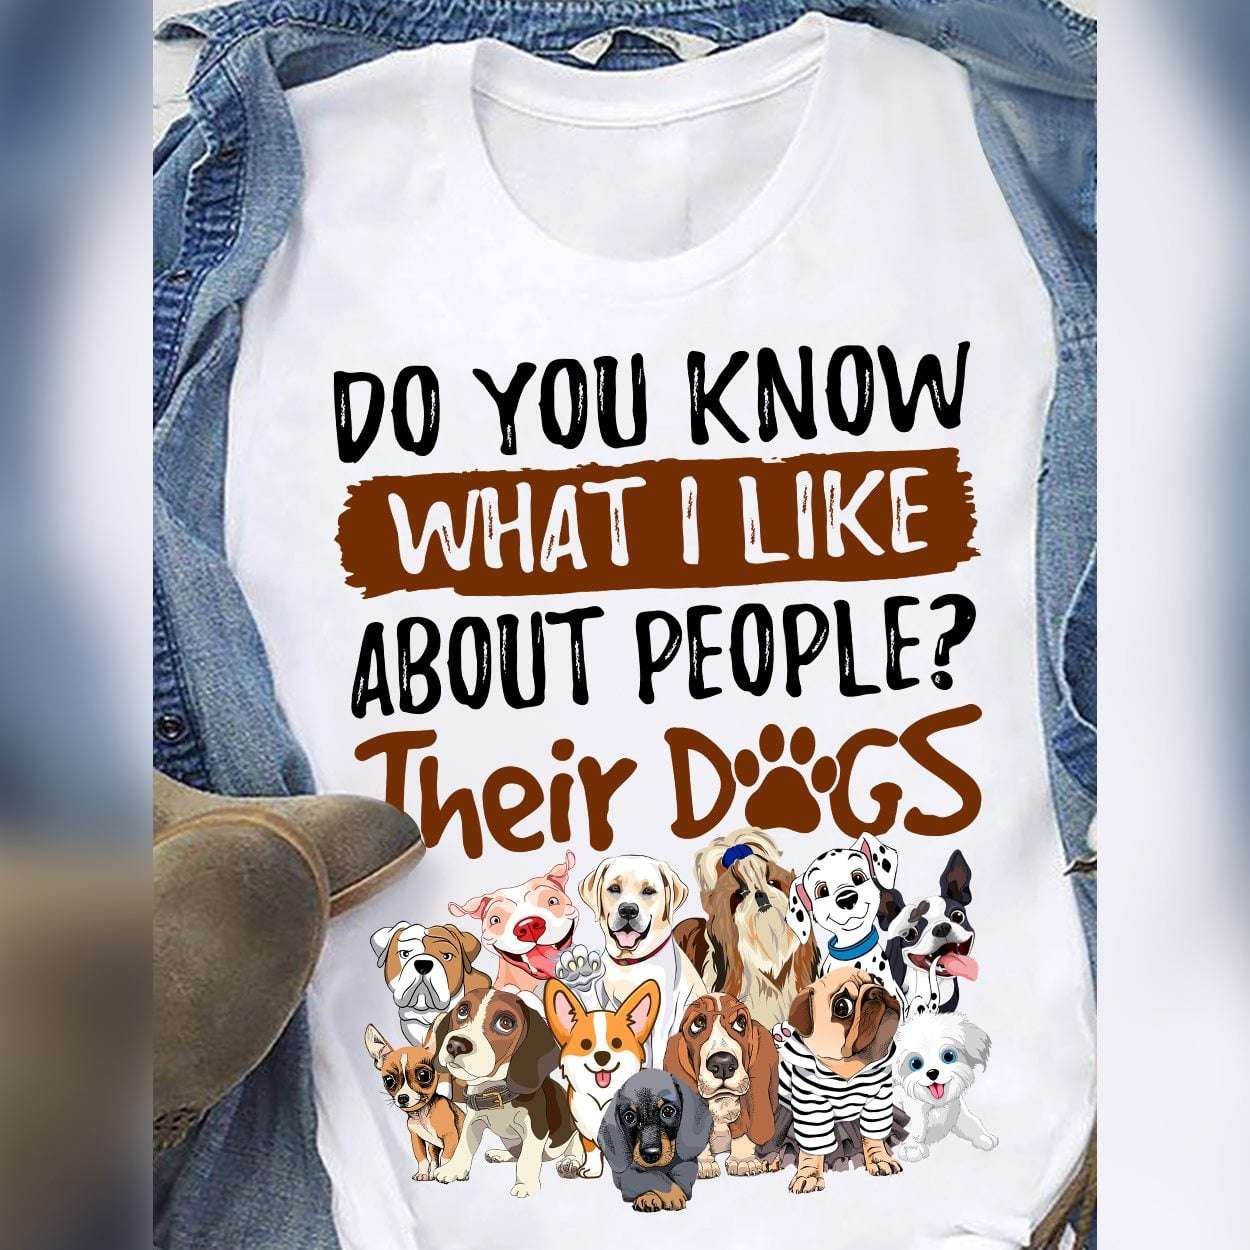 Do you know what I like about people Their dog - Dog paw, dog lover T-shirt